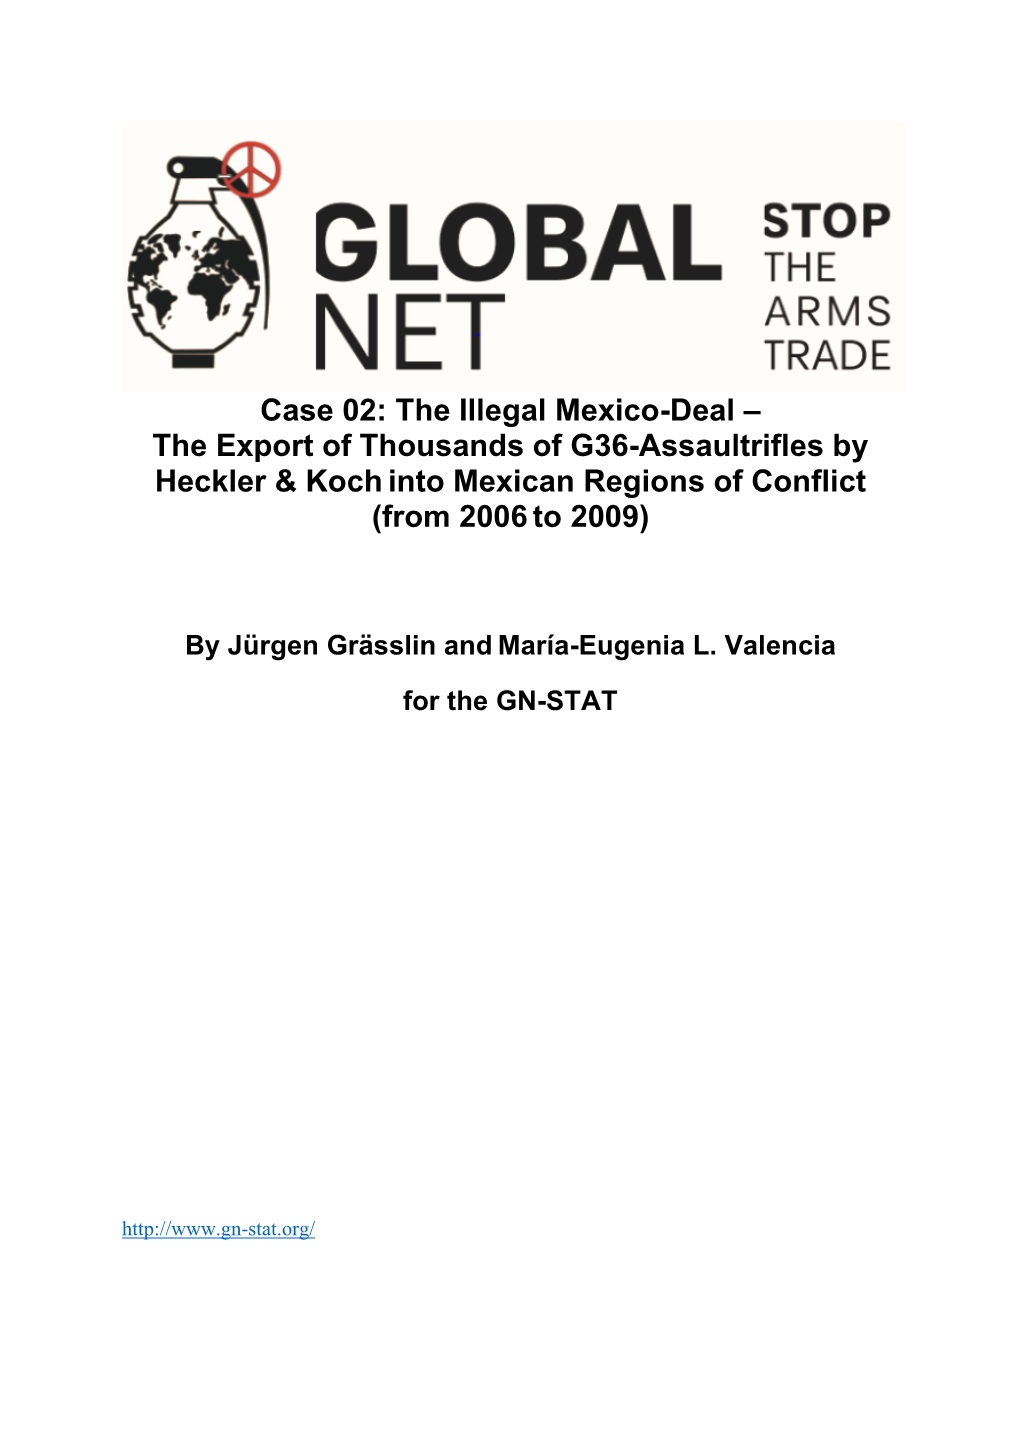 Case 02: the Illegal Mexico-Deal – the Export of Thousands of G36-Assaultrifles by Heckler & Koch Into Mexican Regions of Conflict (From 2006 to 2009)